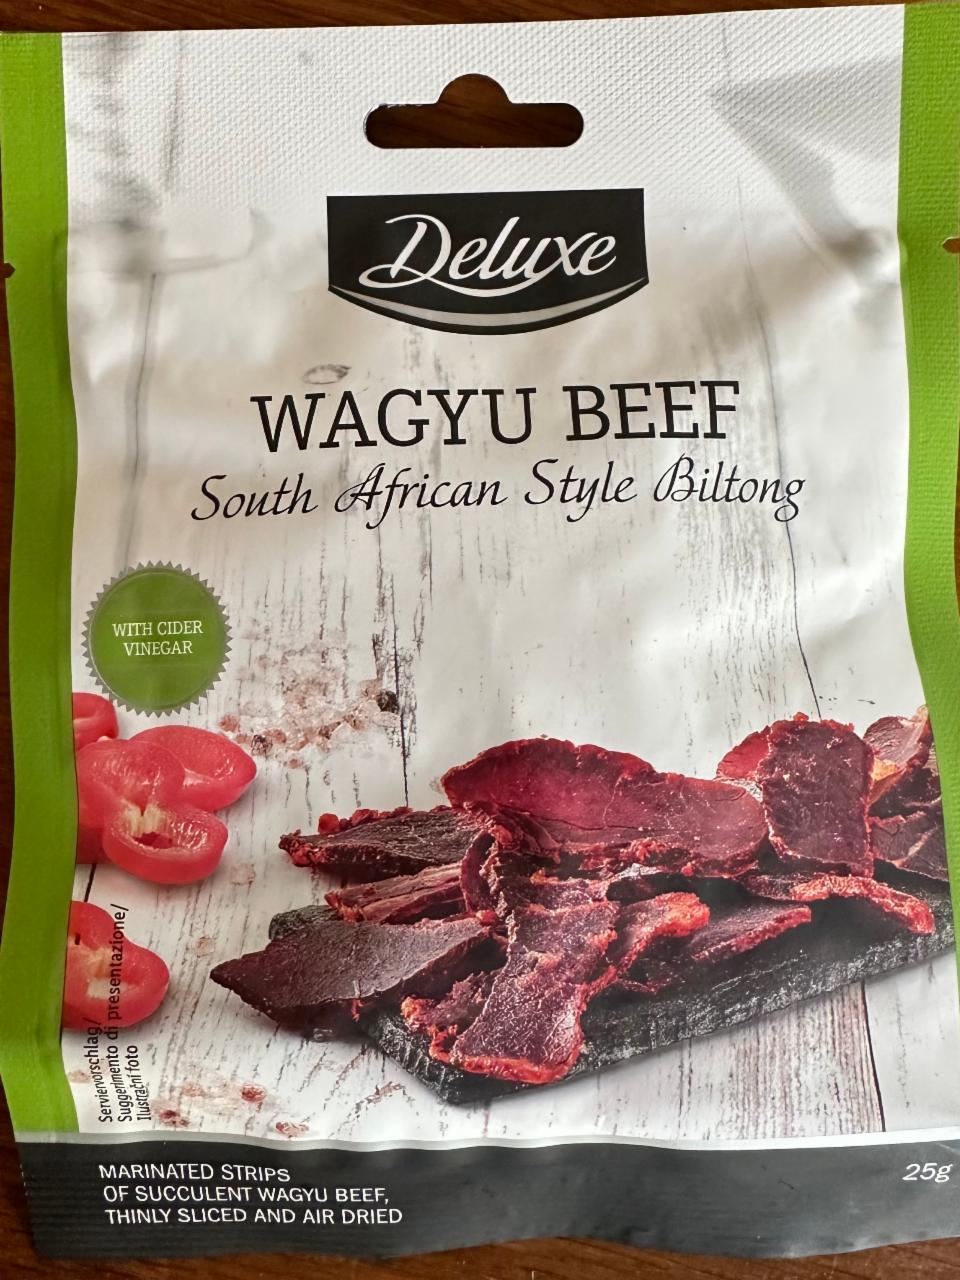 Fotografie - Wagyu Beef South African Style Biltong Deluxe